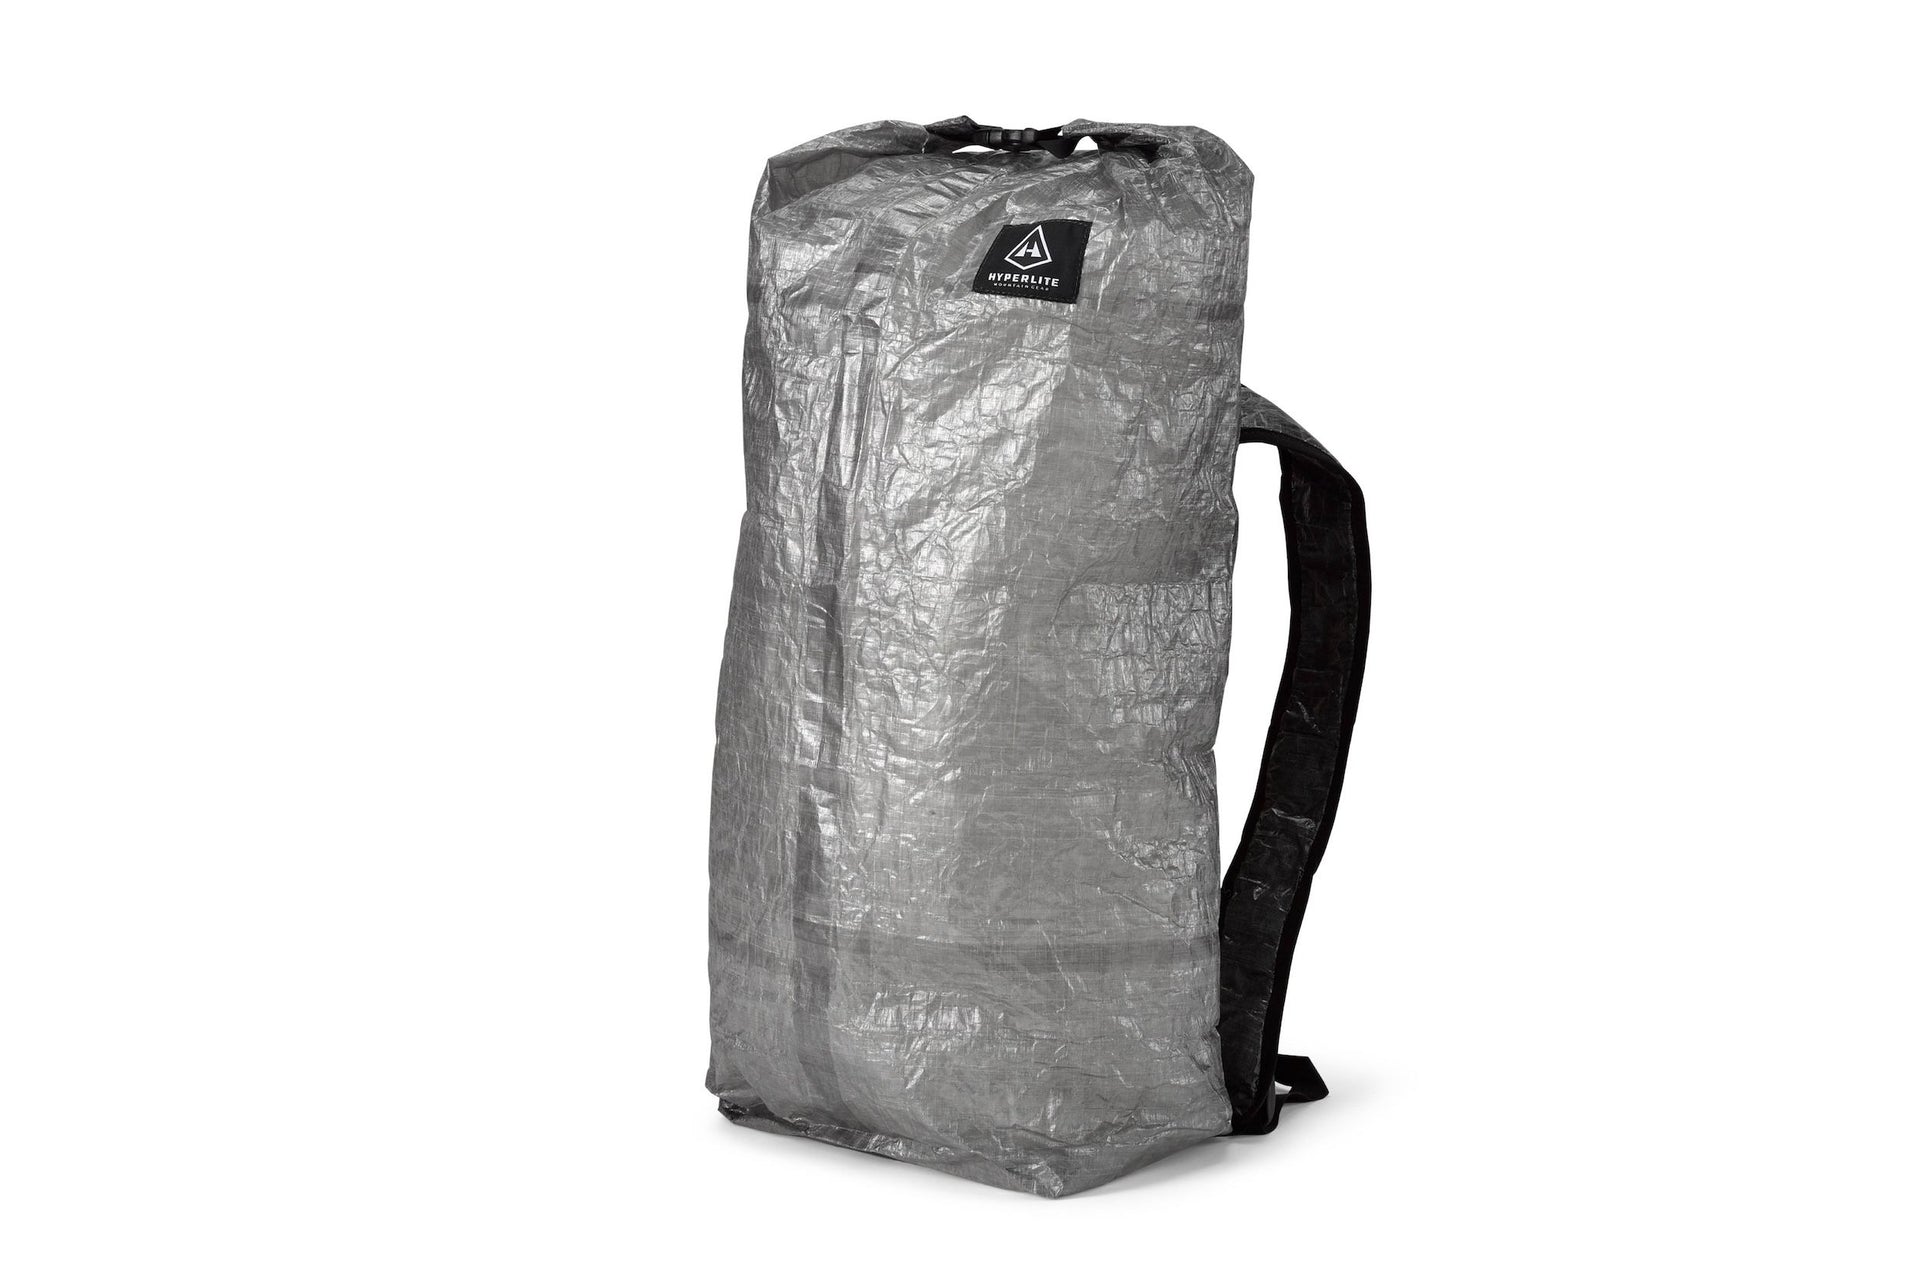 A silver backpack on a white background.